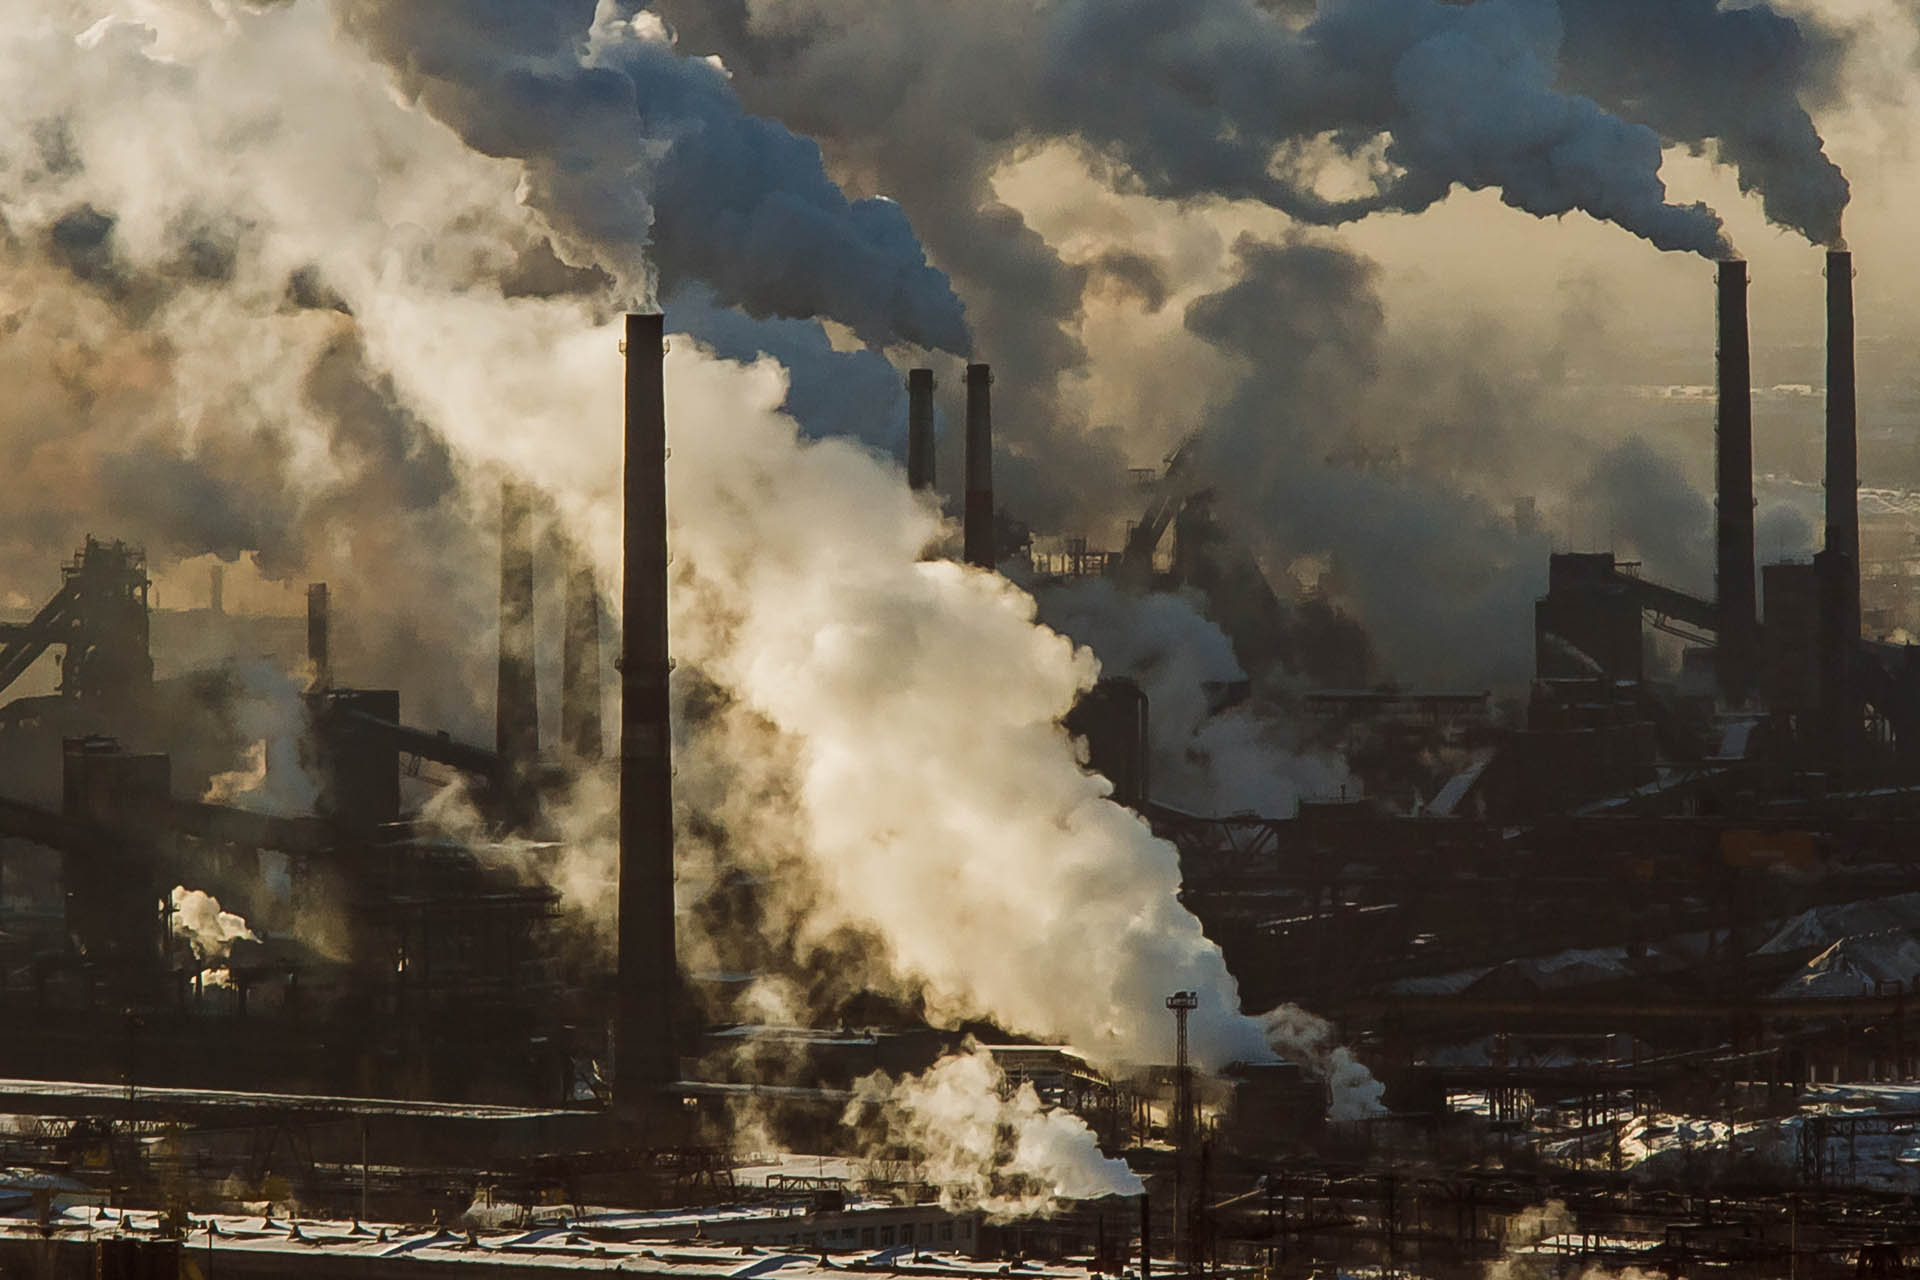 Pollution from factory chimneys